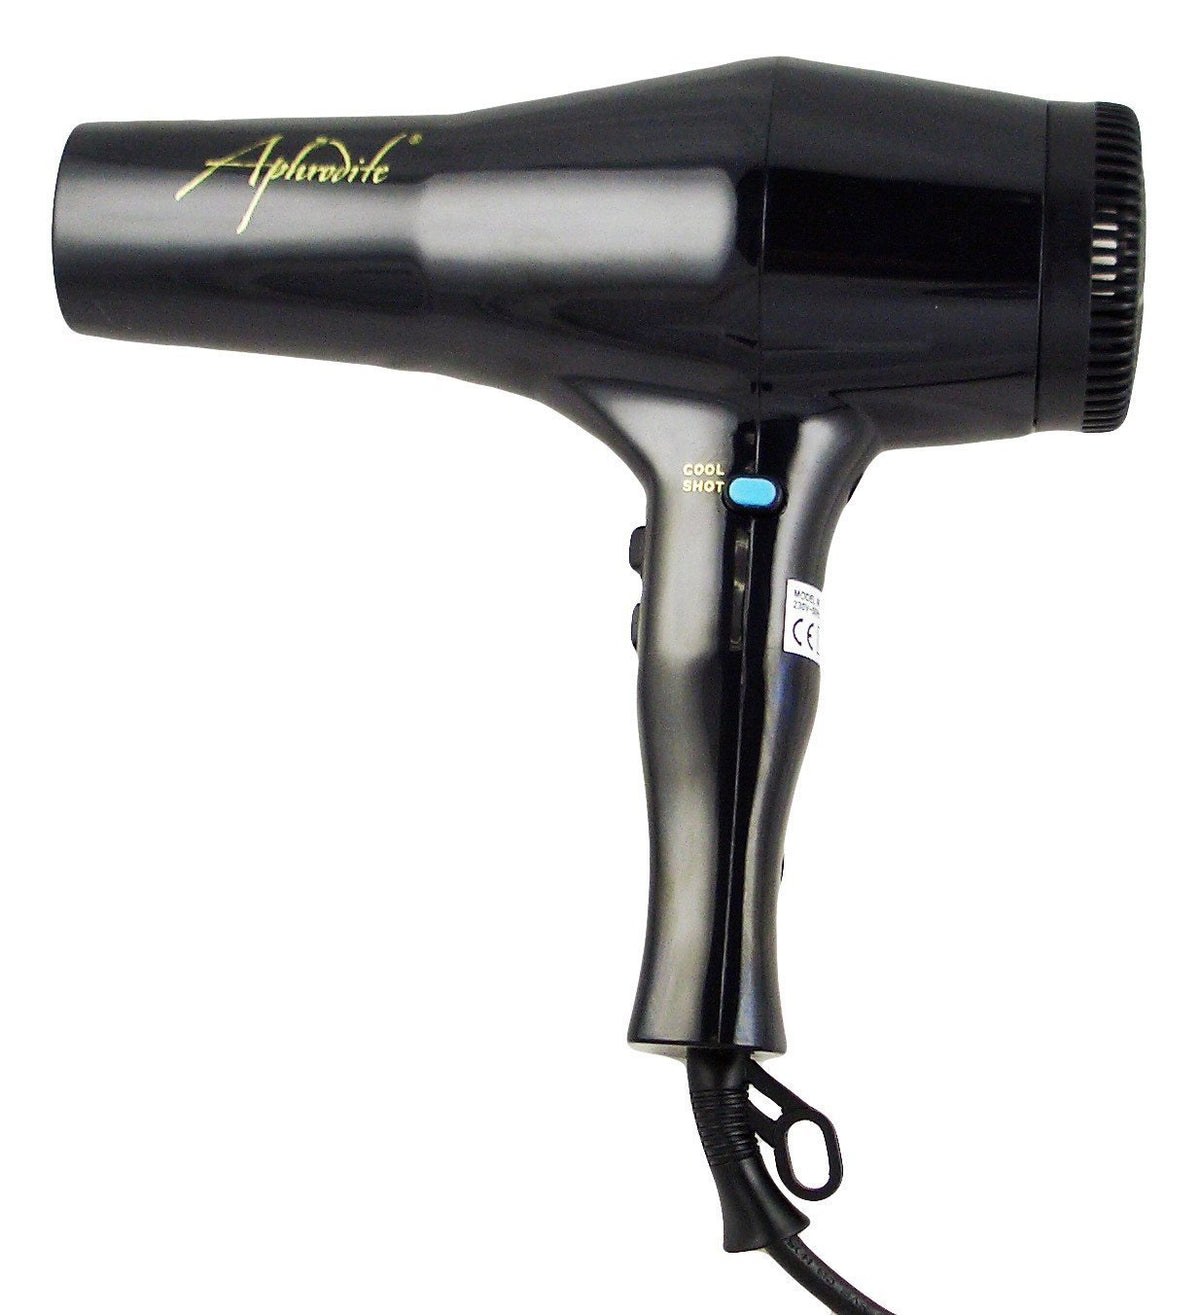 Aphrodite Super Shot 2000 Professional Hair Dryer - Beauty Hair Products LtdElectricals